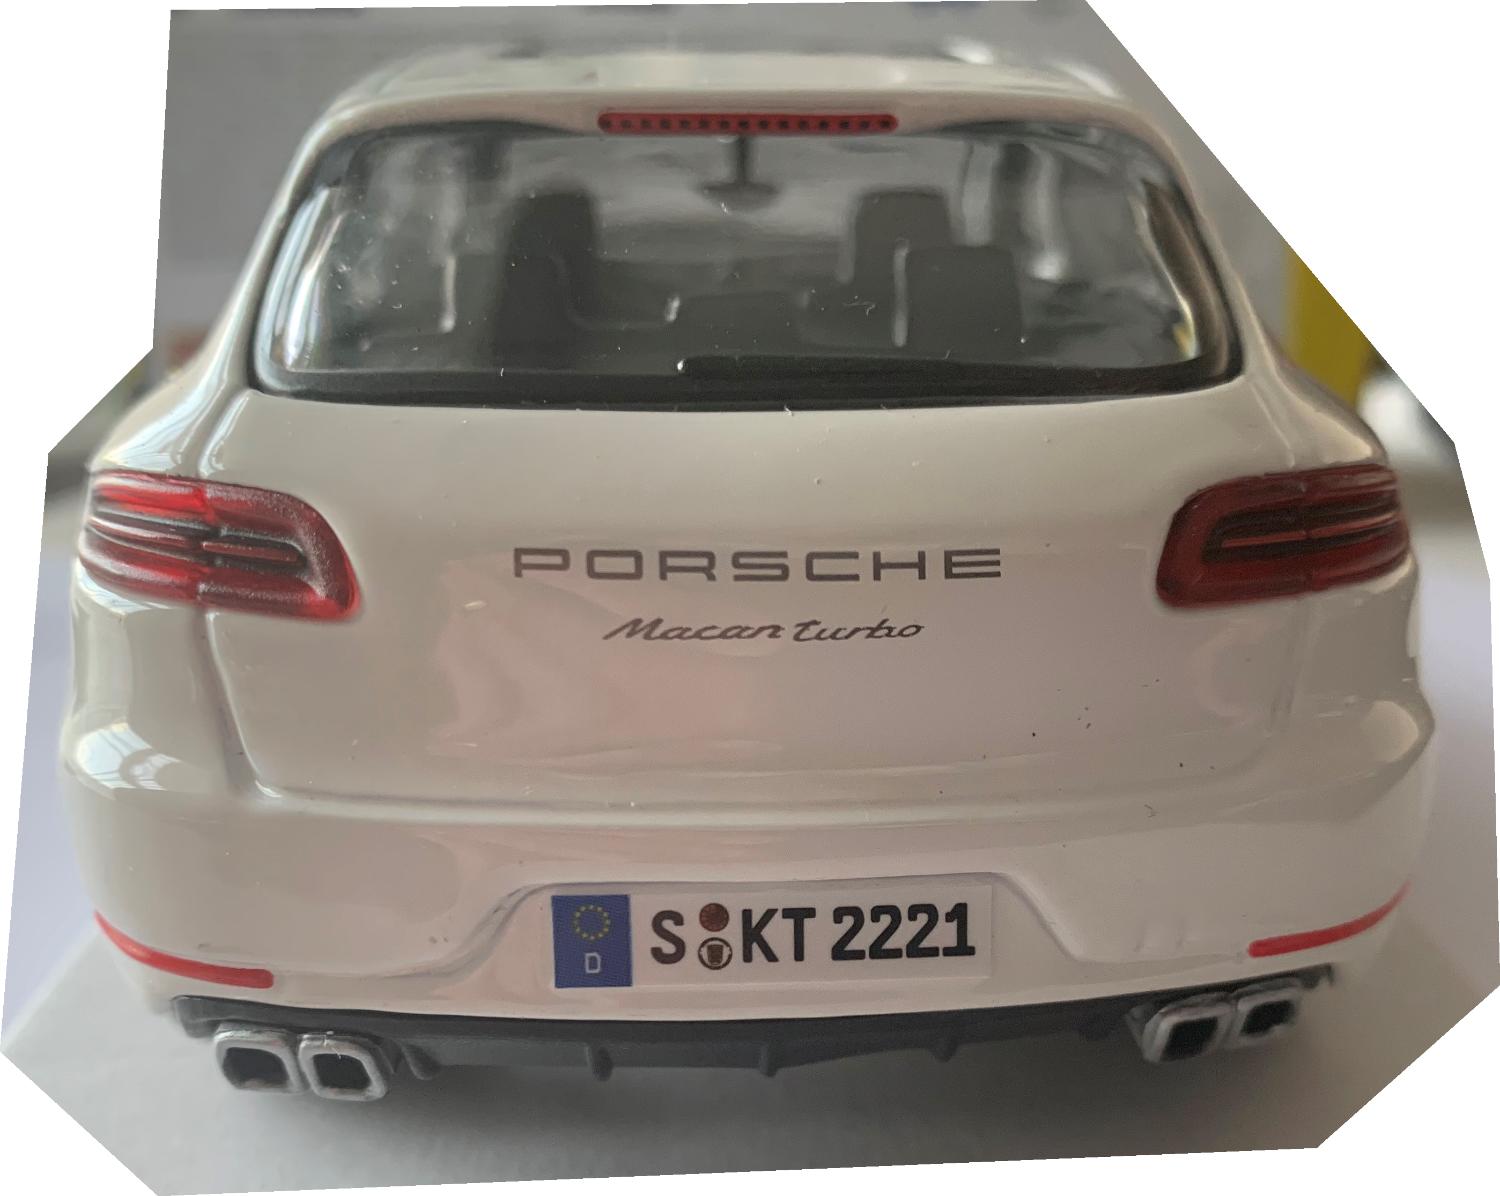 An excellent scale model of a Porsche Macan decorated in white